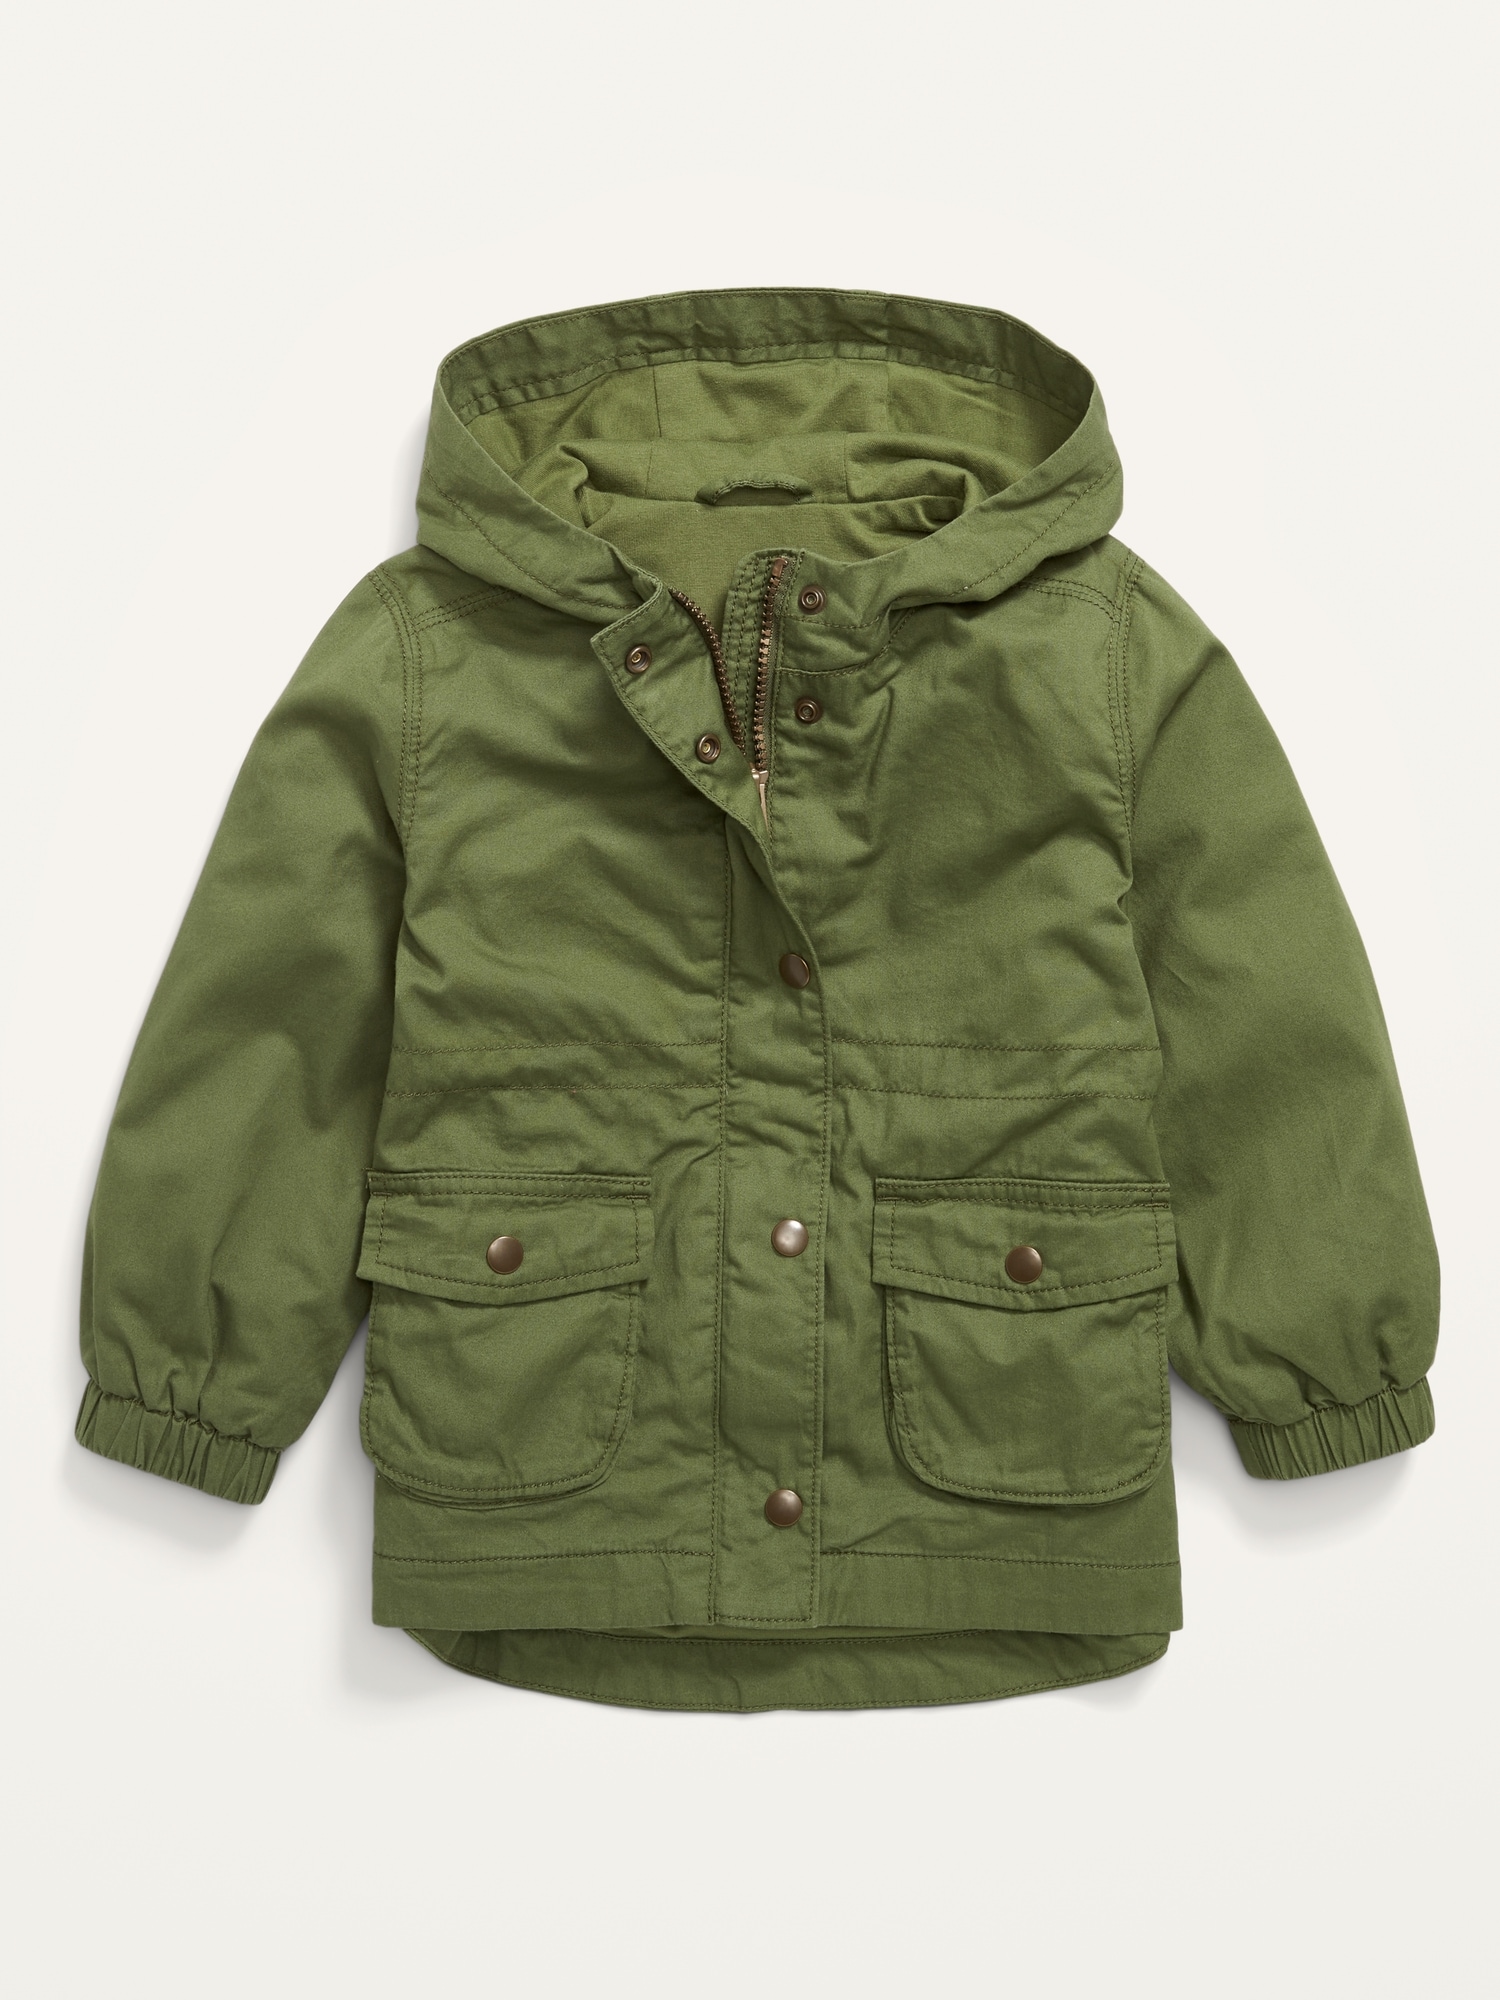 Gerber Baby Hooded Cotton Twill Utility Jacket (Infant Toddler)